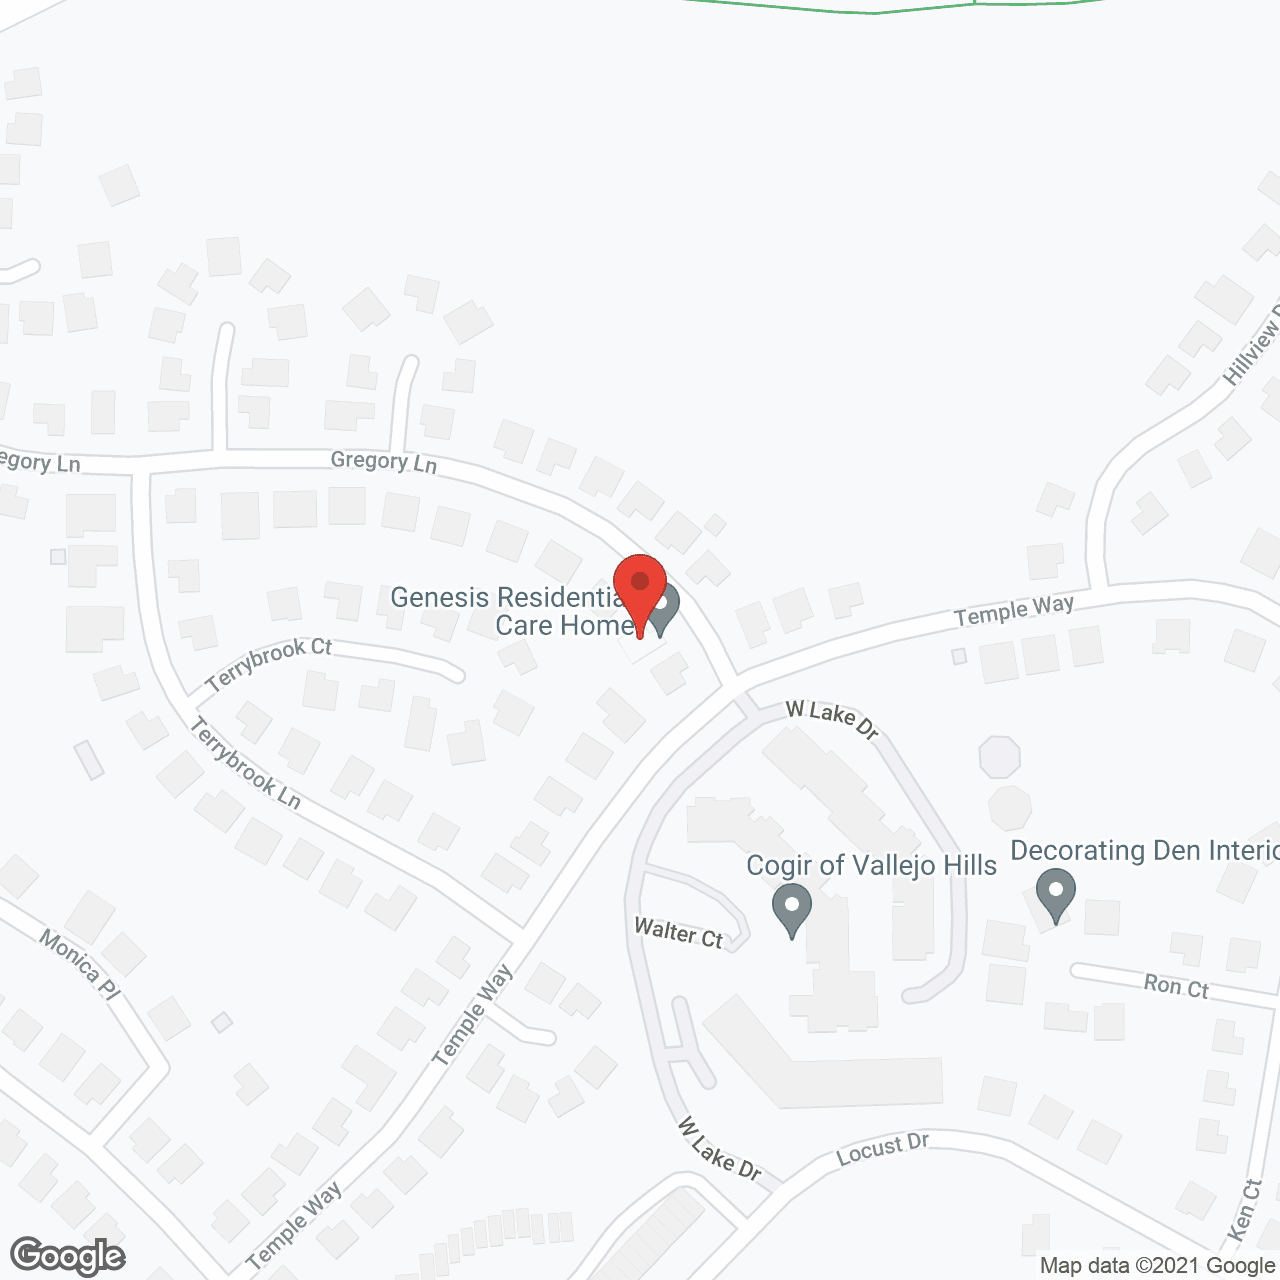 St. Peter Residential Care Home in google map